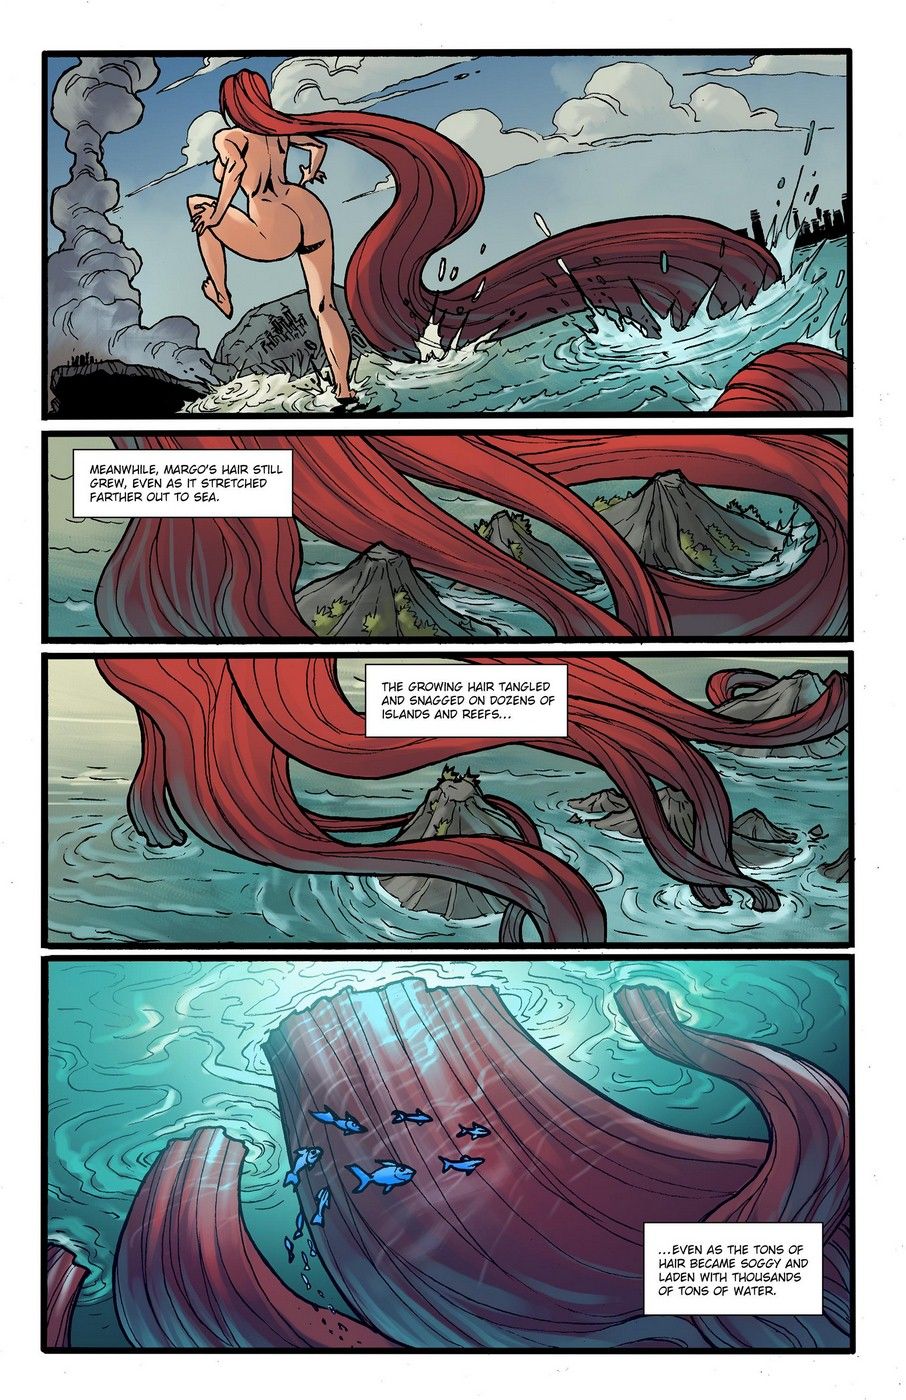 Giantness Fan- Dont Mess With Margo 2 page 1